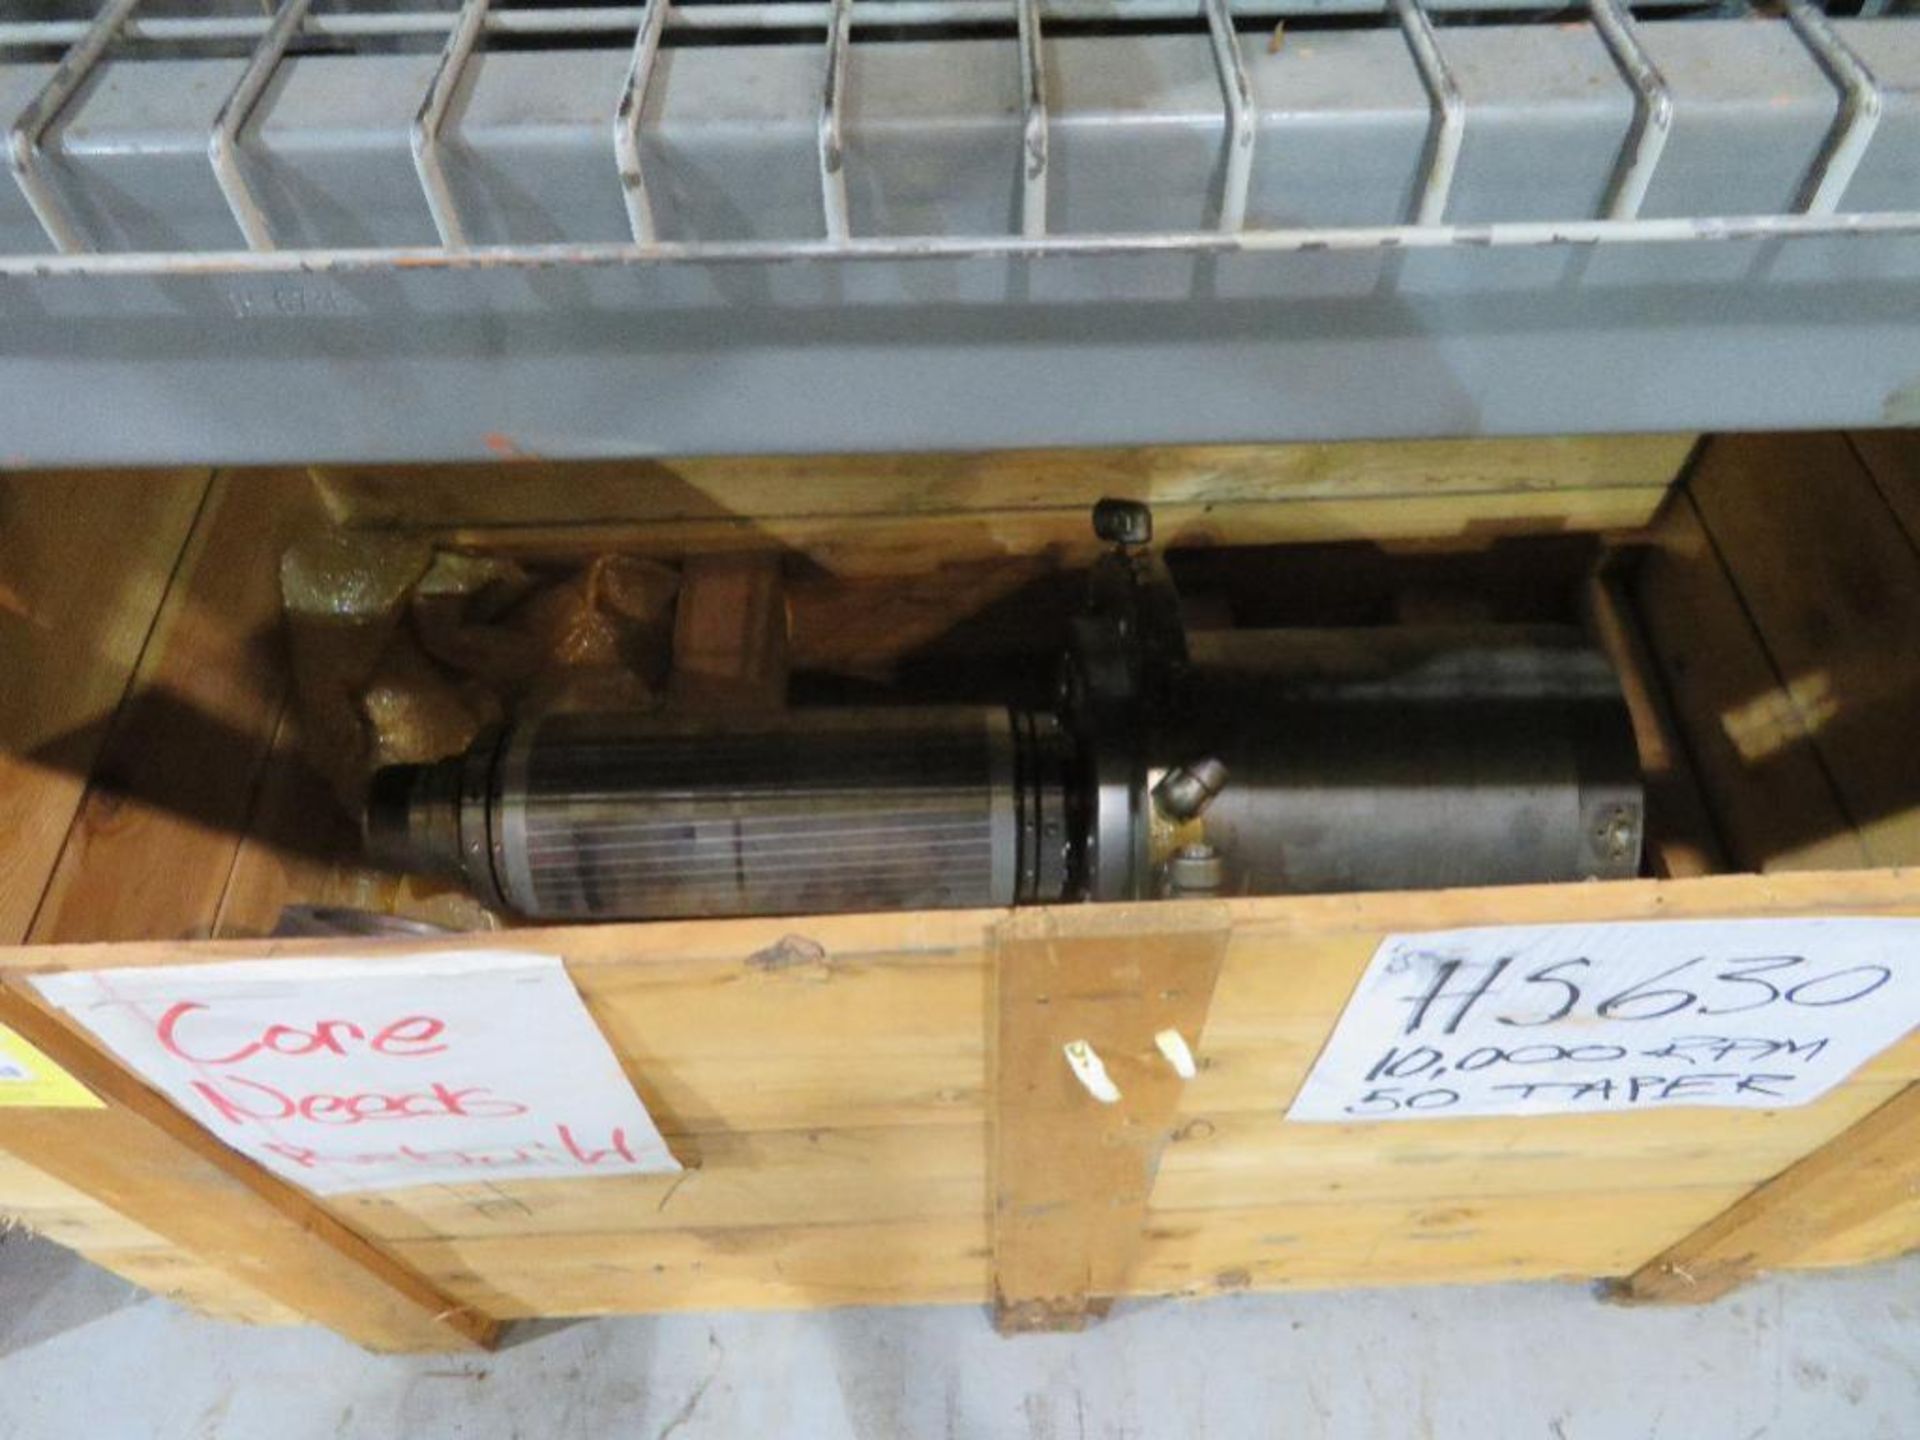 LOT: (1) Spindle Assembly for HS-630, 10,000 RPM, 50 Taper (core needs new bearings) (on bottom Rack